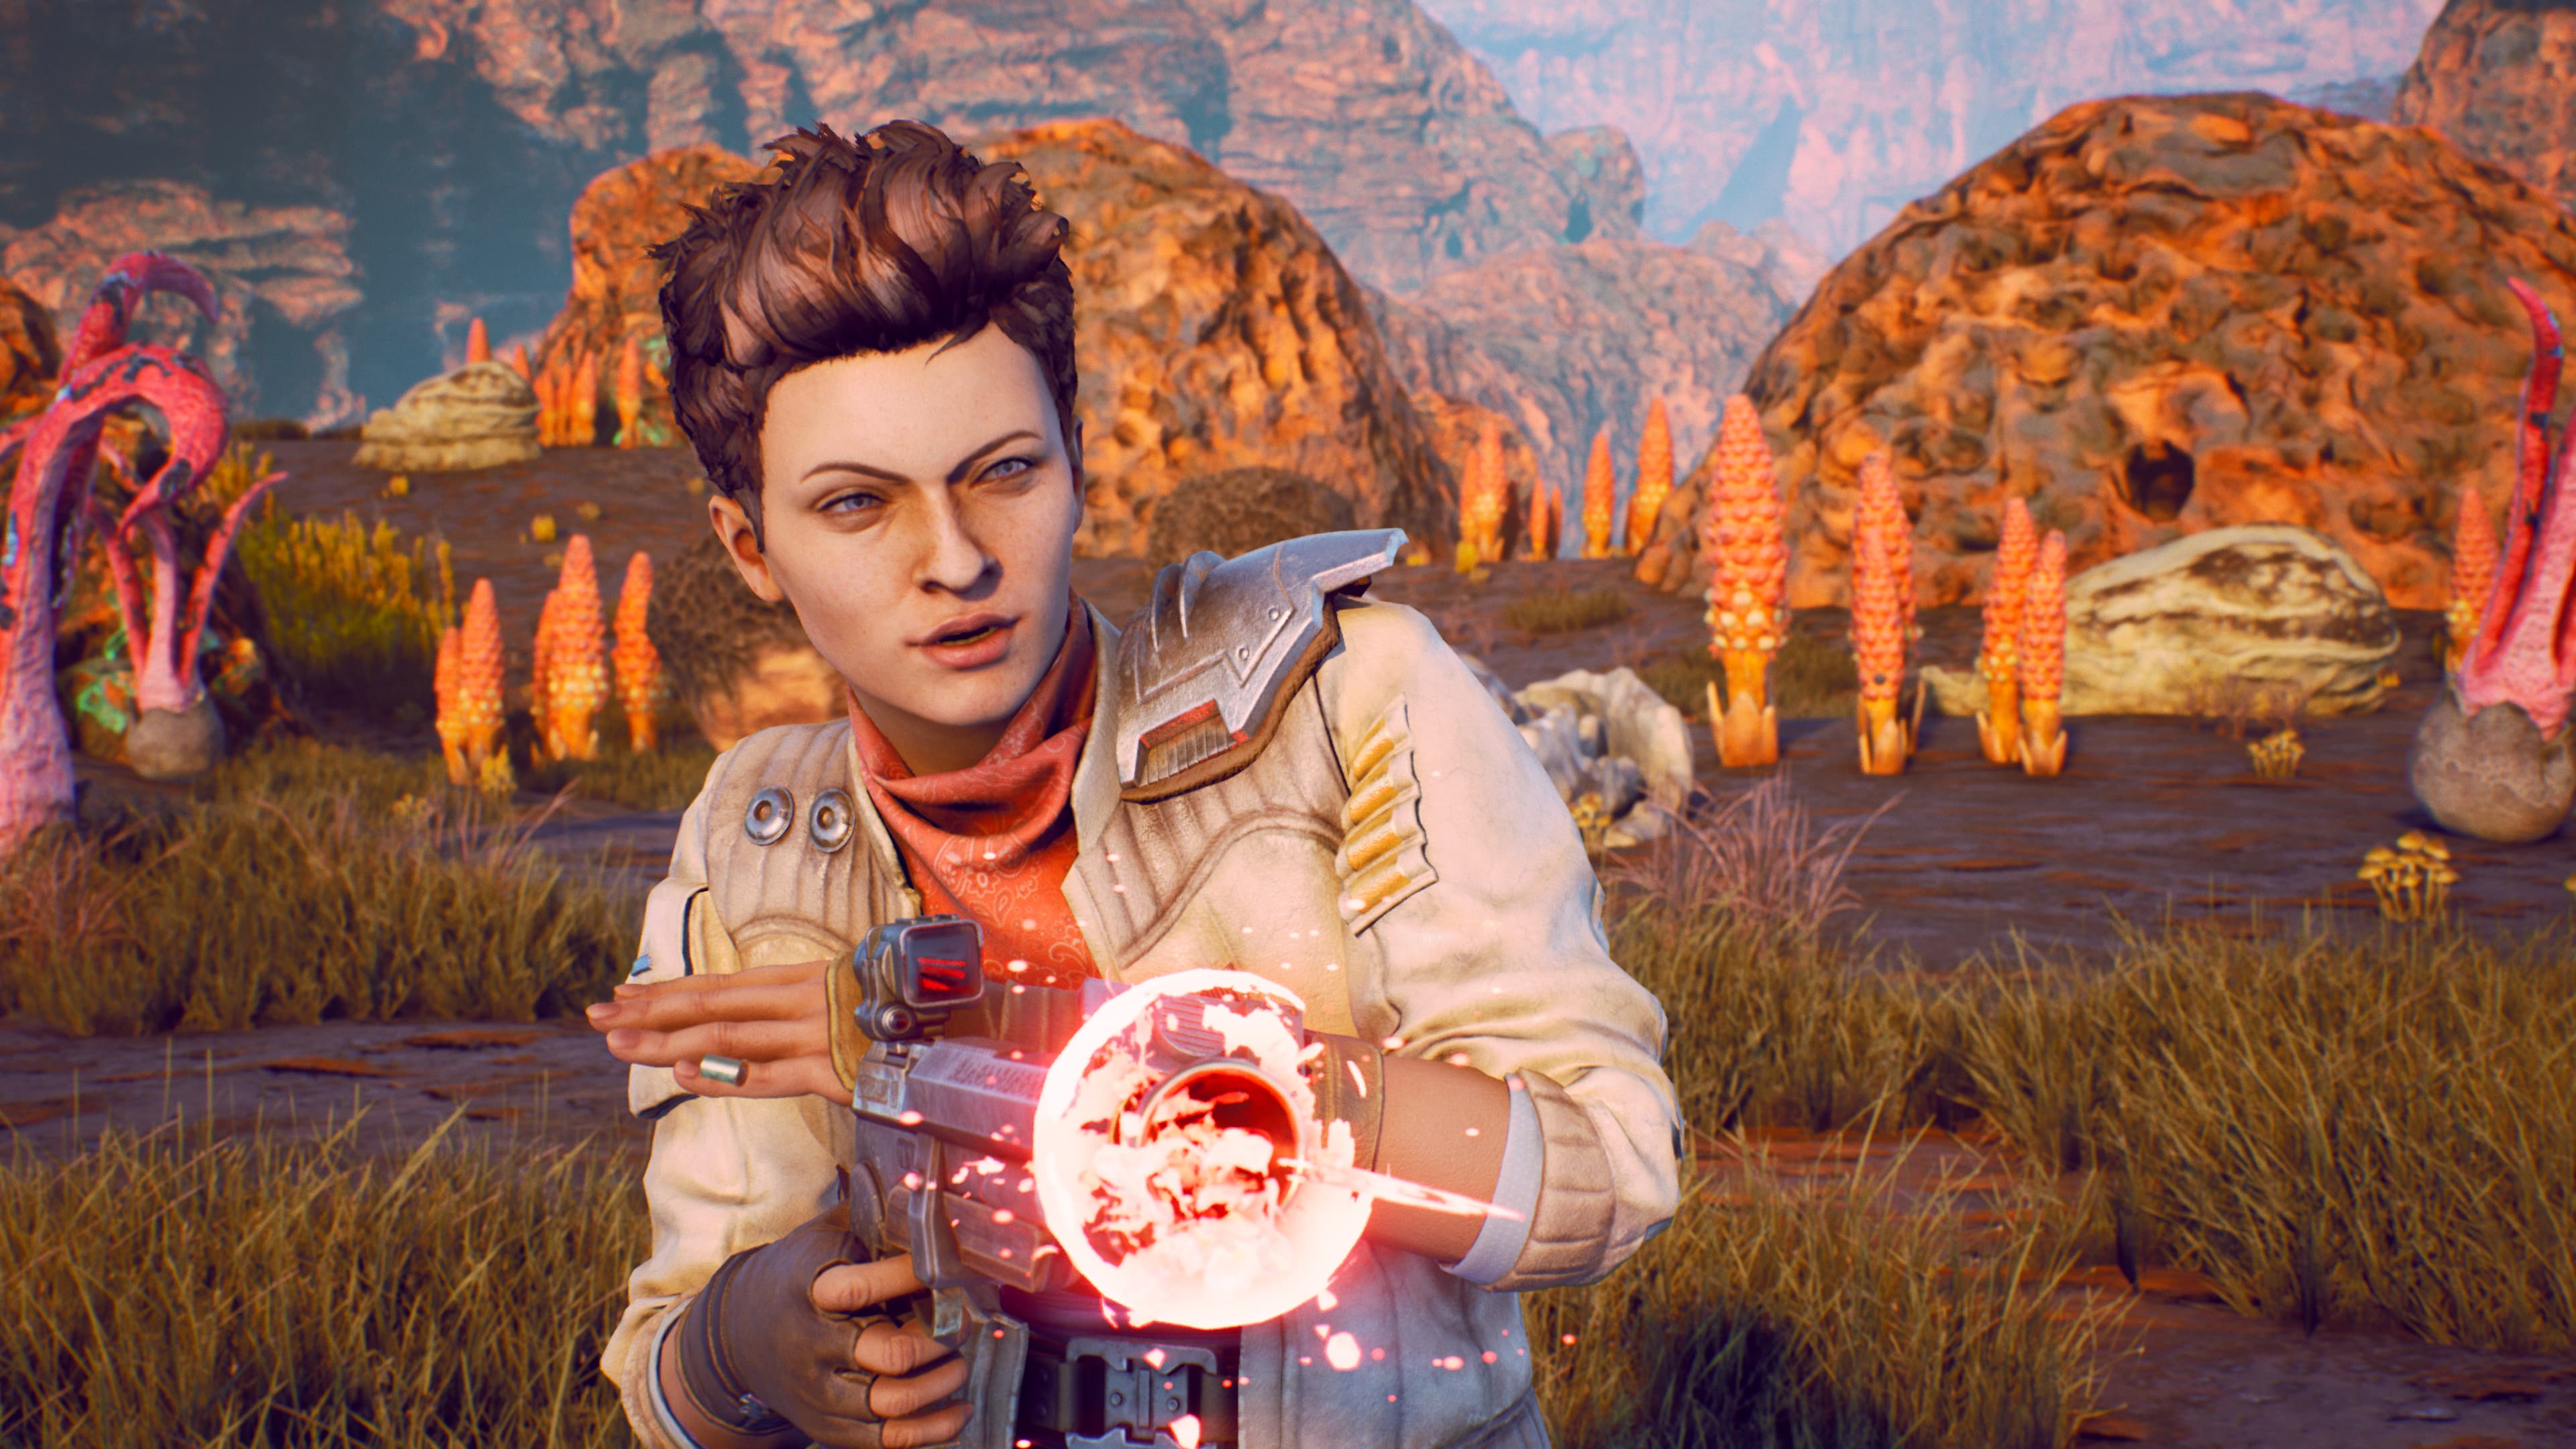 Compra o Outer Worlds para PC, PS4, Xbox, Switch | Loja oficial